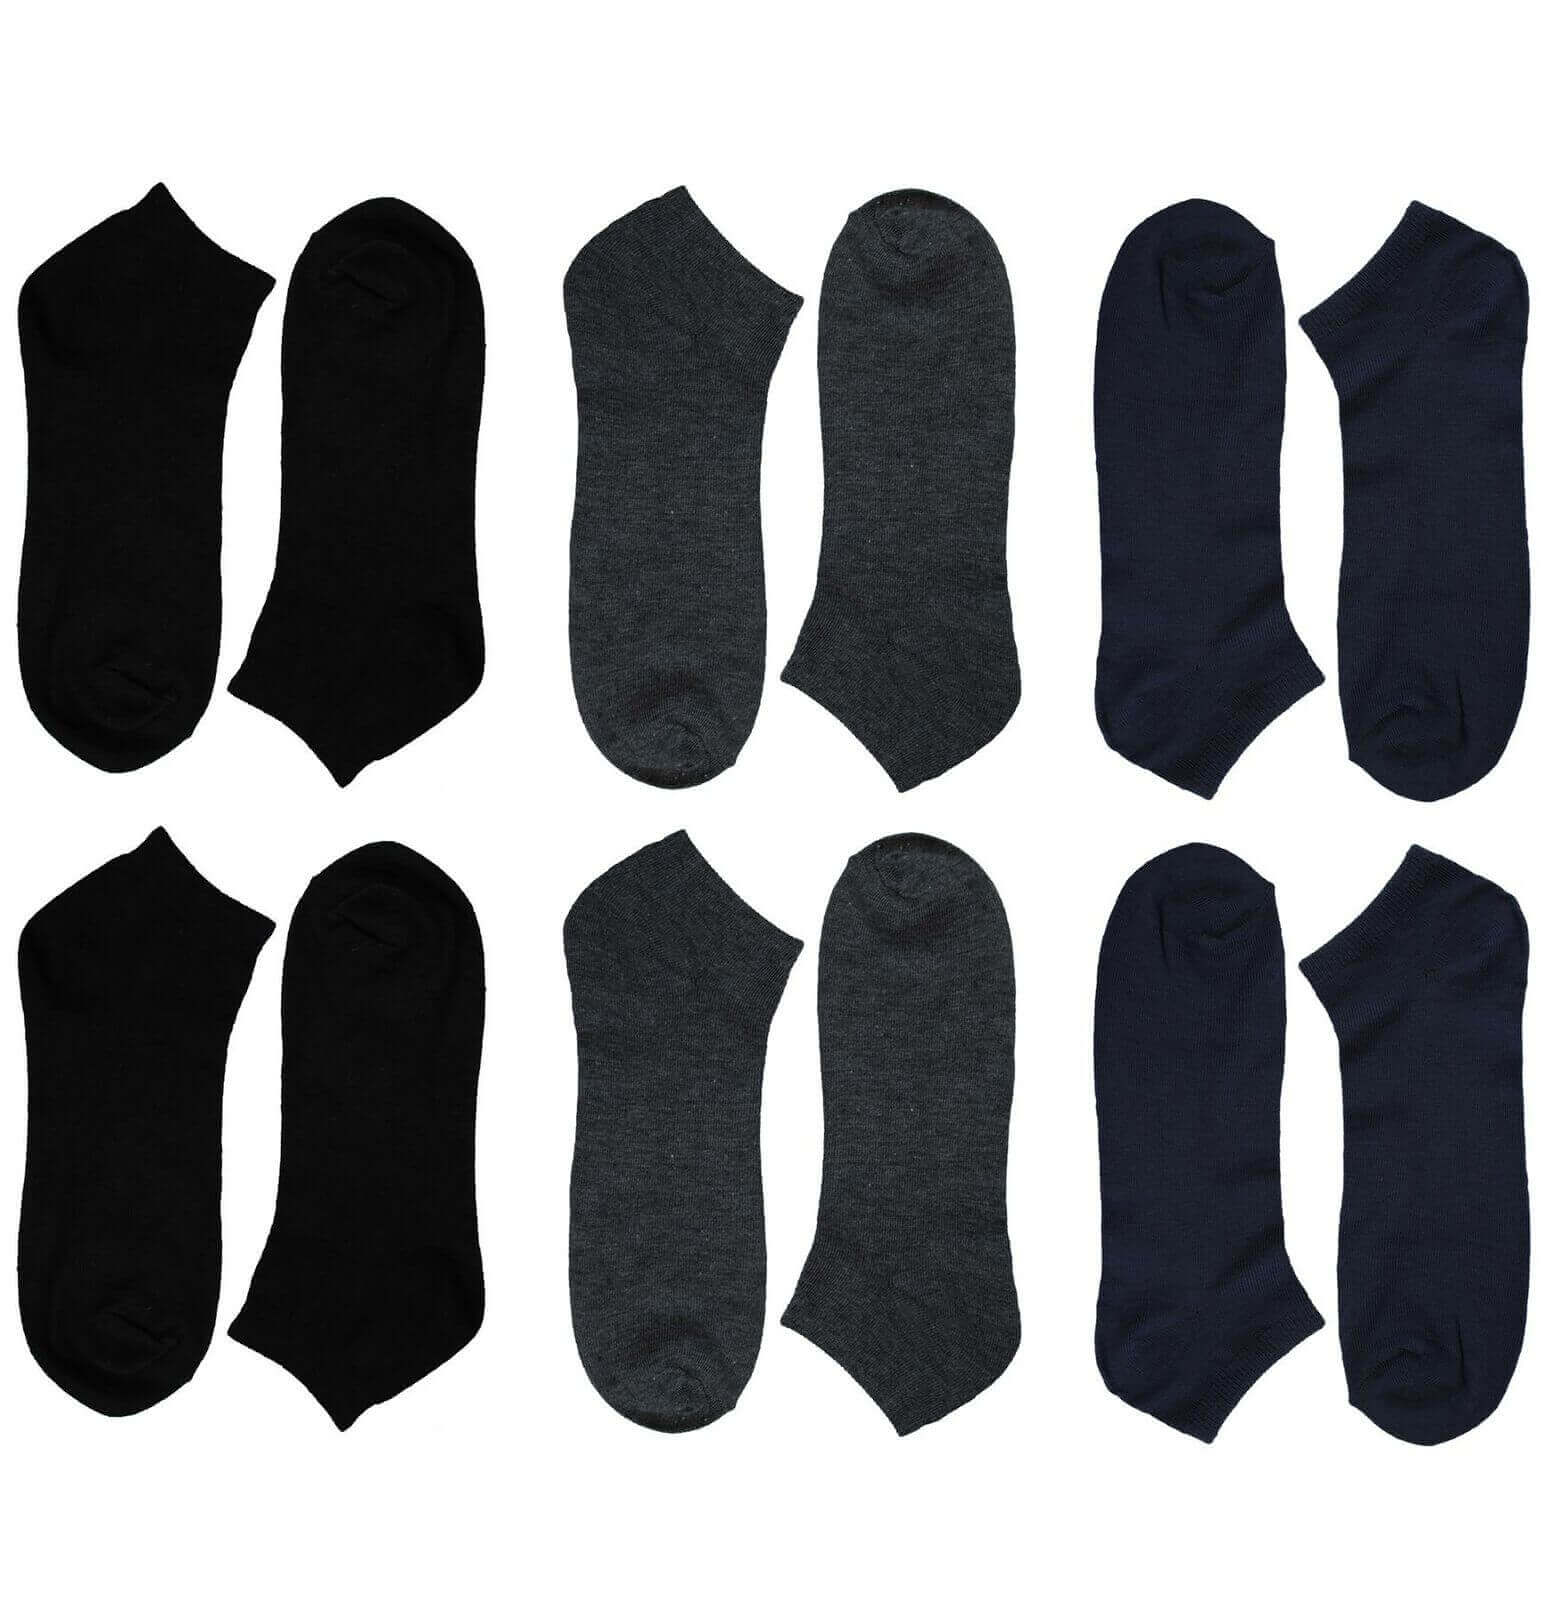 12 Pairs Of Men's Trainer Socks Summer Sport Ankle Trainer Socks, White & Black. Buy now for £7.00. A Socks by Sock Stack. 6-11, assorted, athletics, black, boot, boys socks, breathable, comfortable, cosy, cotton, footwear, gym, half, home, low cut, mens,